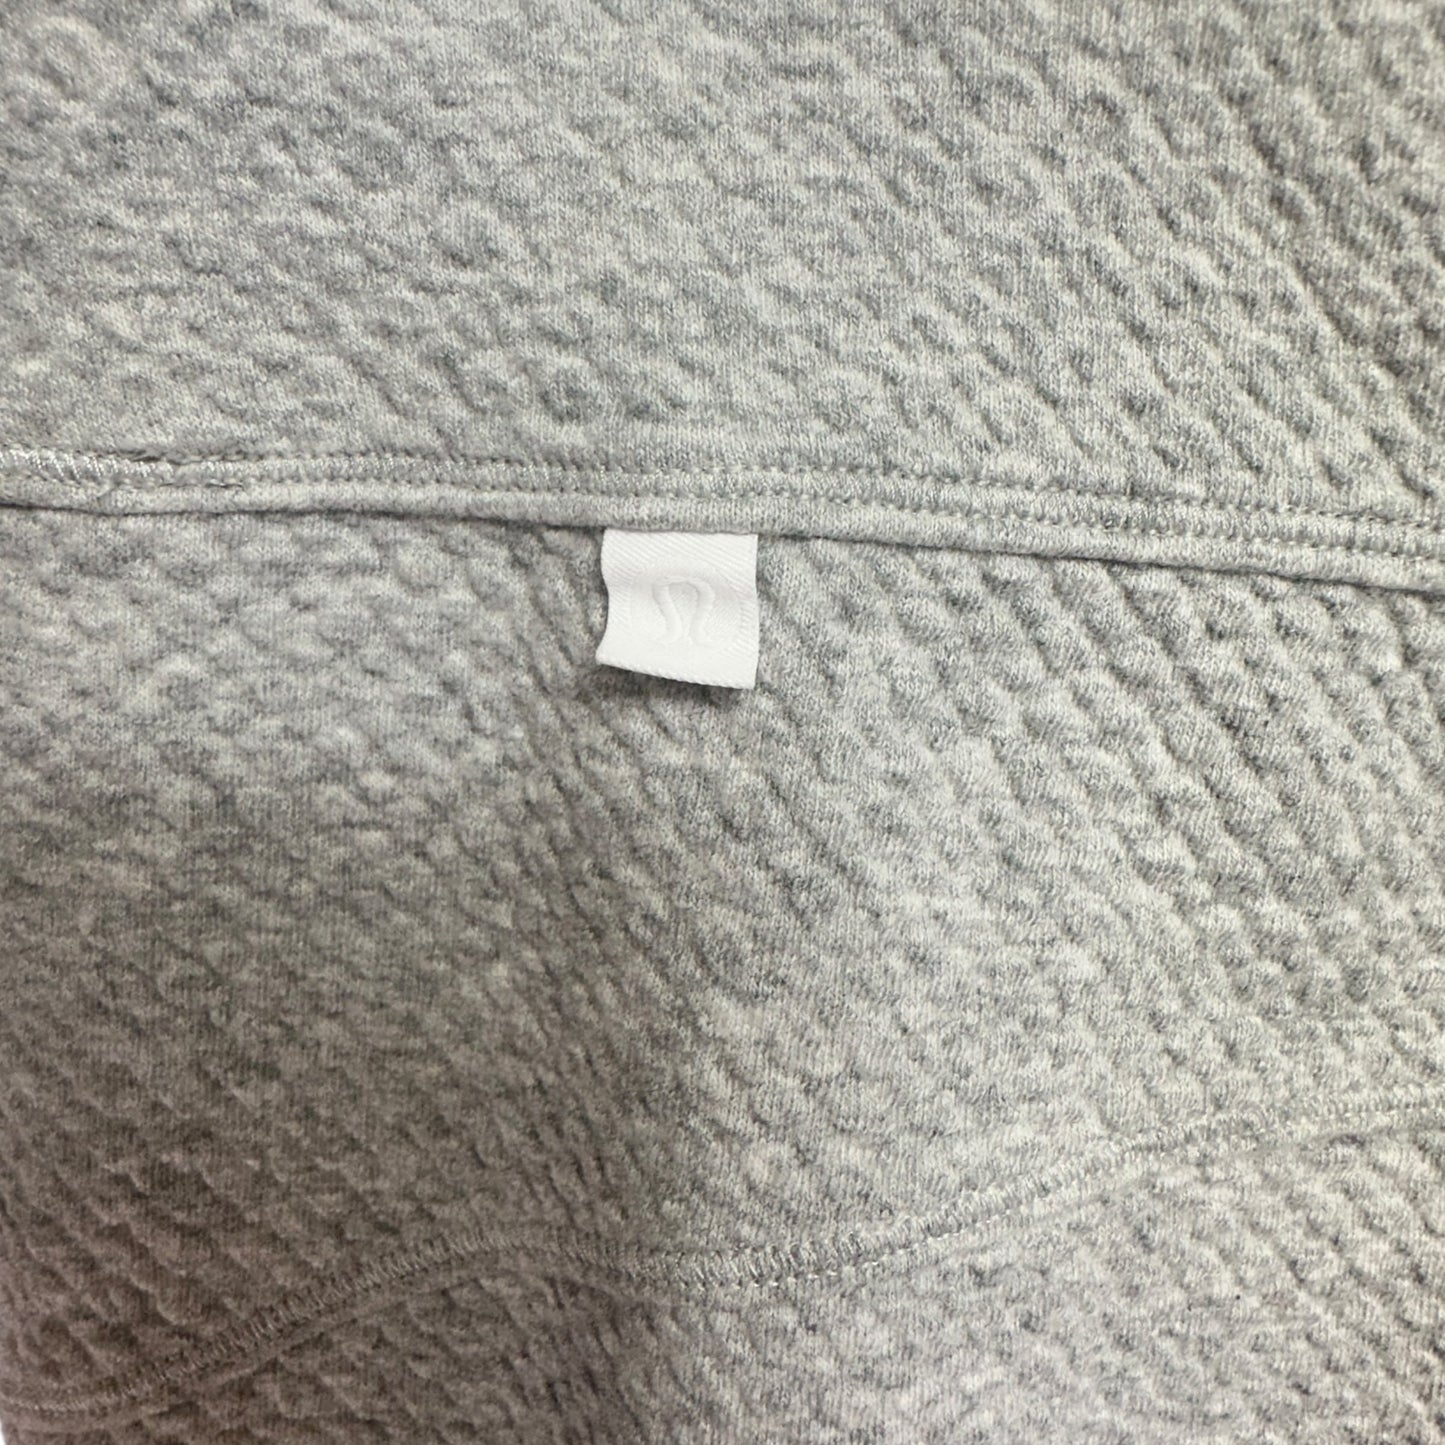 Can You Feel The Pleat Crop Lululemon, Size 12